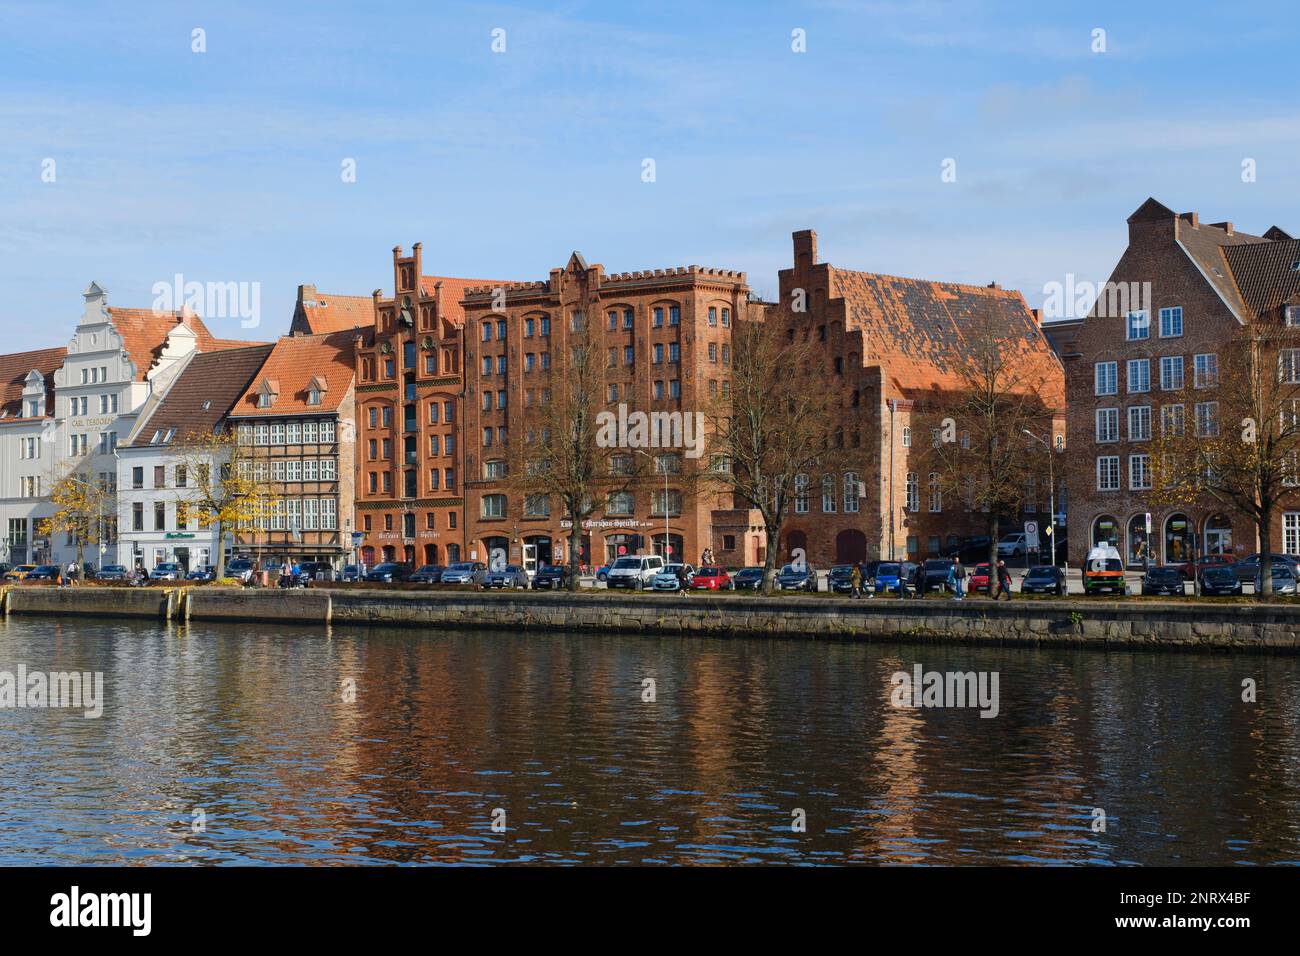 Building at the old town at the Trave river, Lübeck, UNESCO-World Heritage, Schleswig-Holstein, Germany, Europe Stock Photo